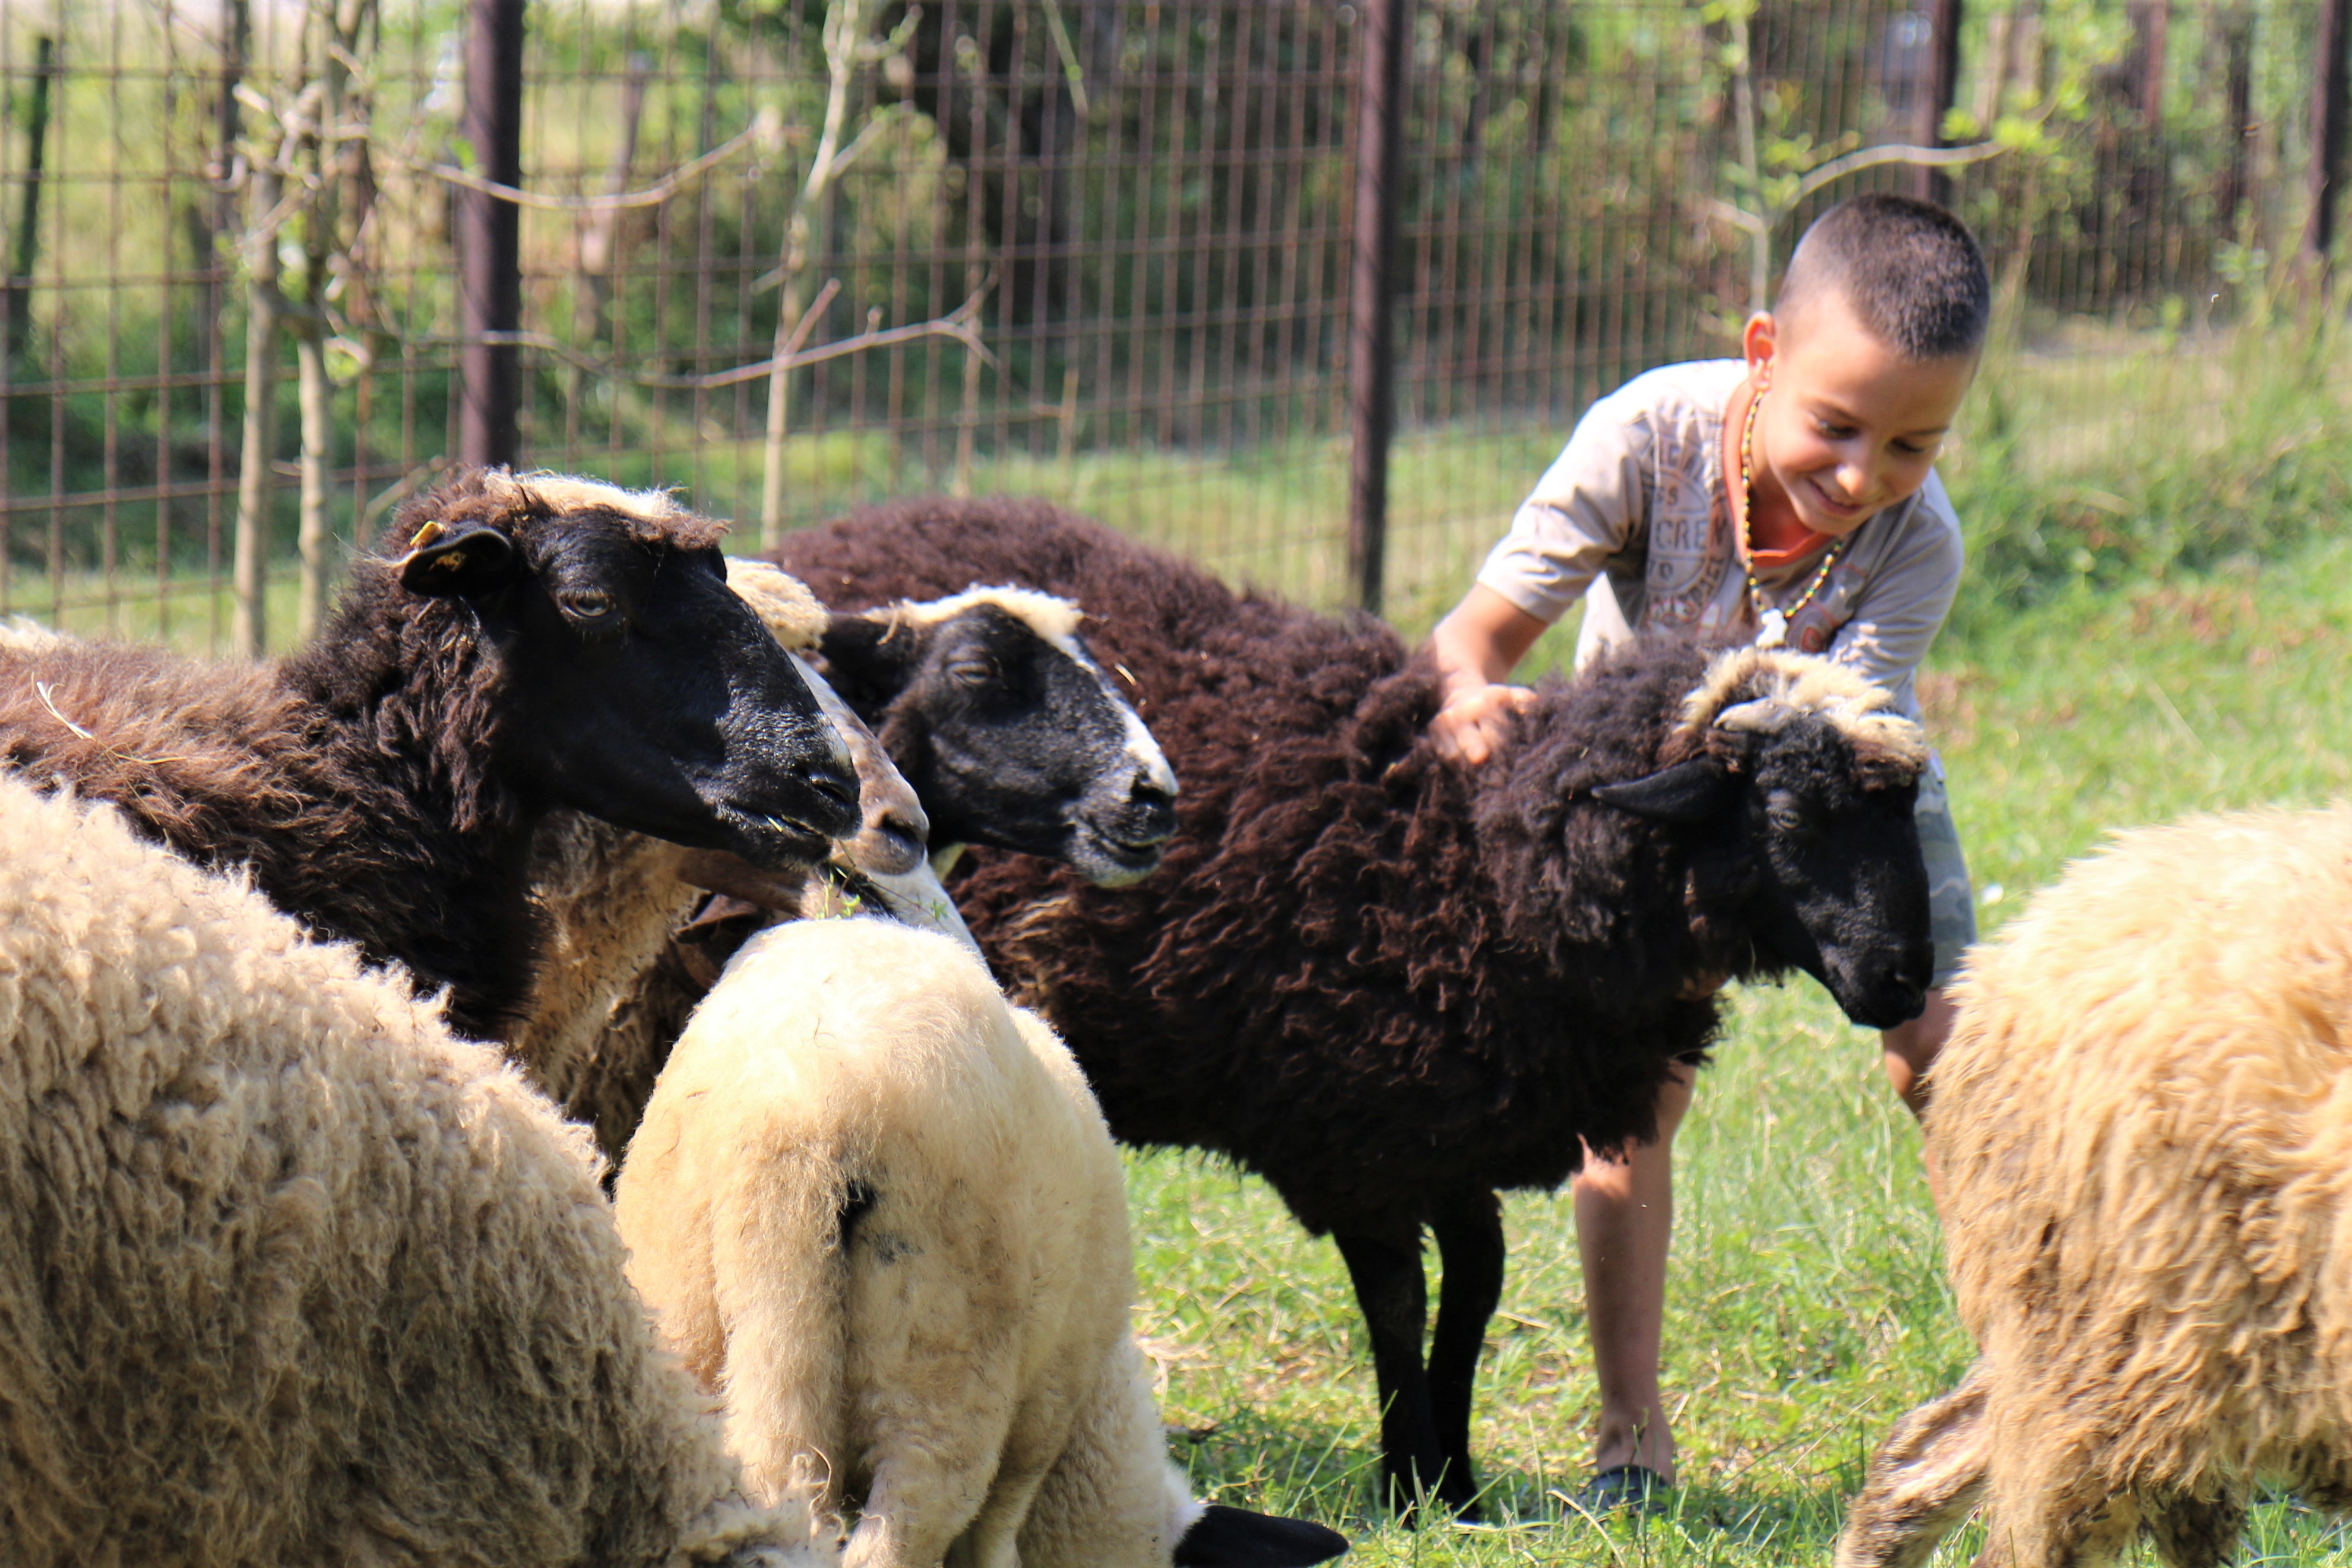 Alen (8) plays with the sheep